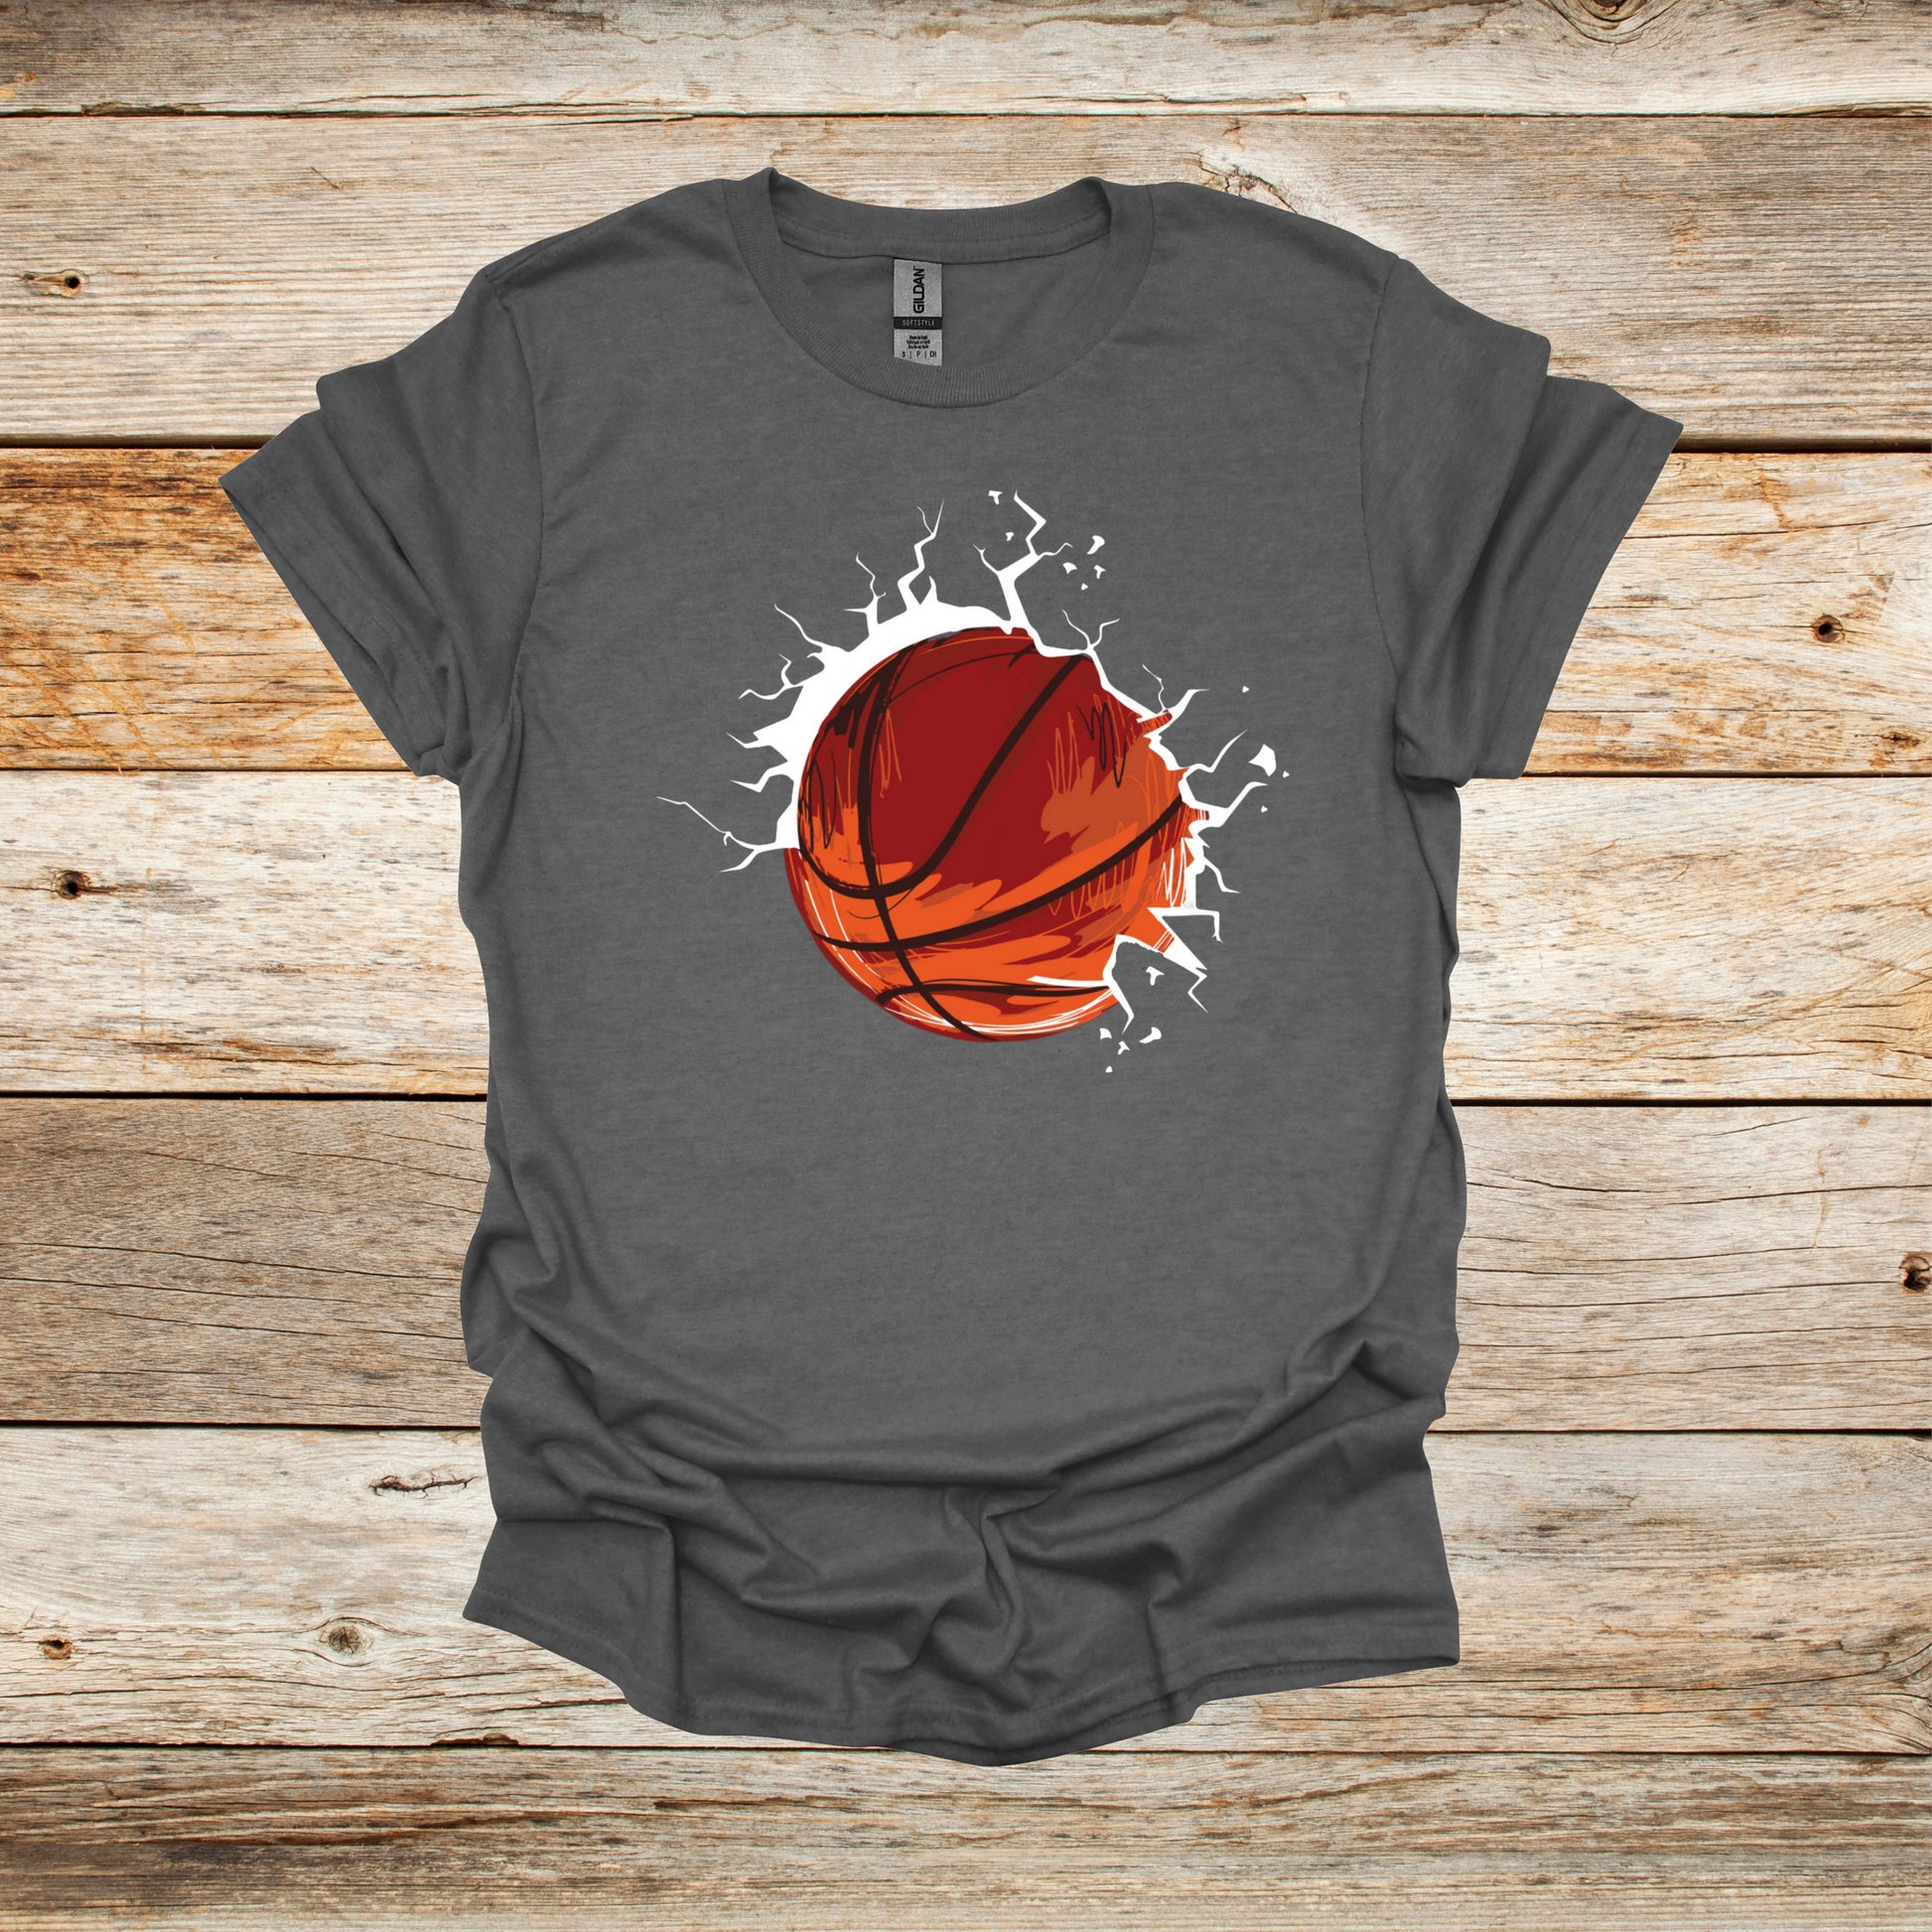 Basketball T-Shirt - Adult and Children's Tee Shirts - Sports T-Shirts Graphic Avenue Graphite Heather Adult Small 